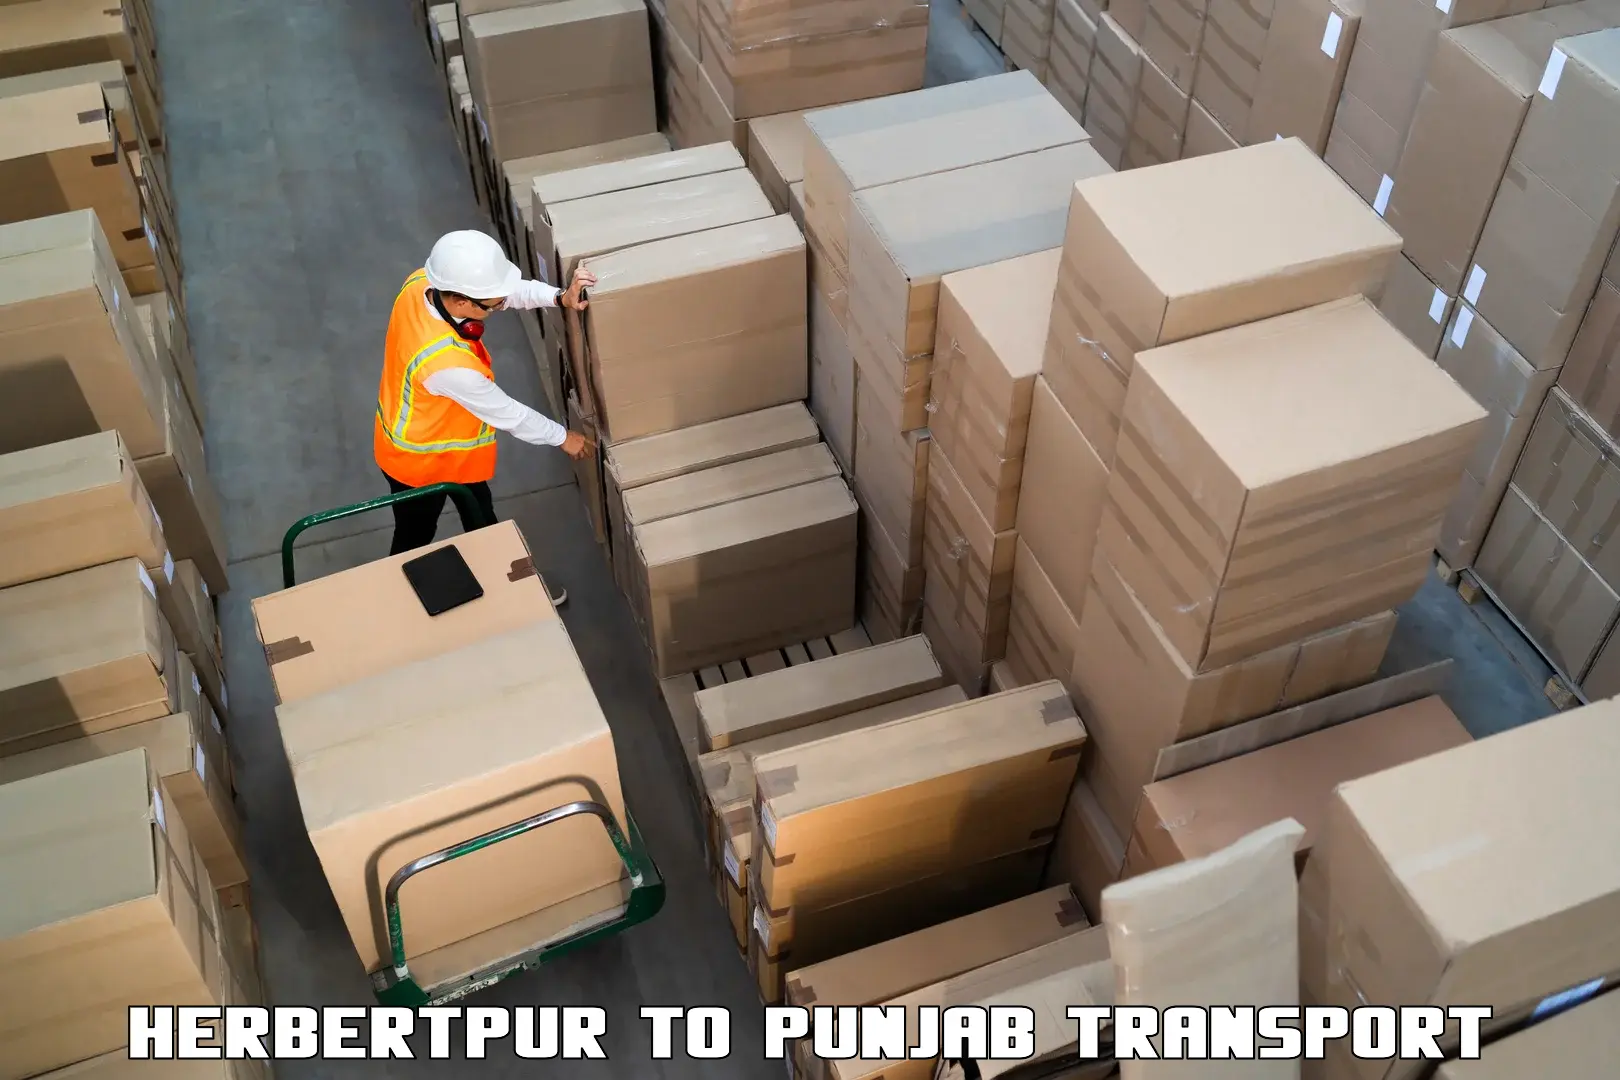 Air freight transport services Herbertpur to Batala